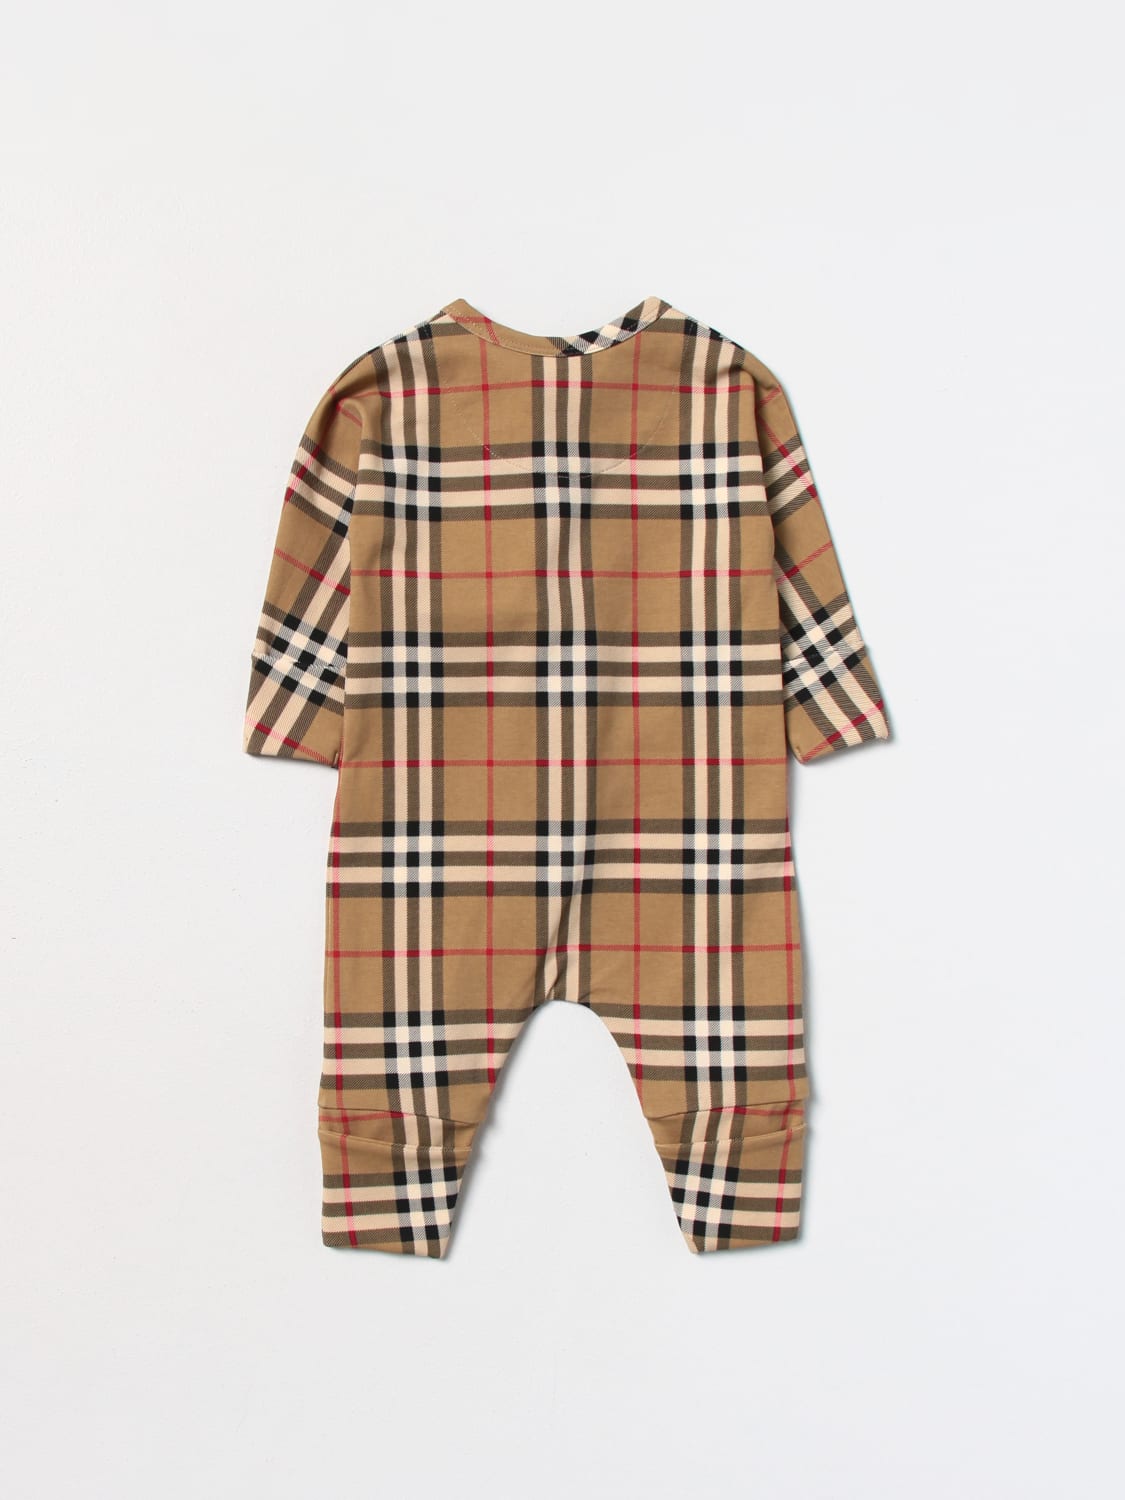 BURBERRY KIDS: tracksuit for boys - Beige | Burberry Kids tracksuit 8070270 online GIGLIO.COM